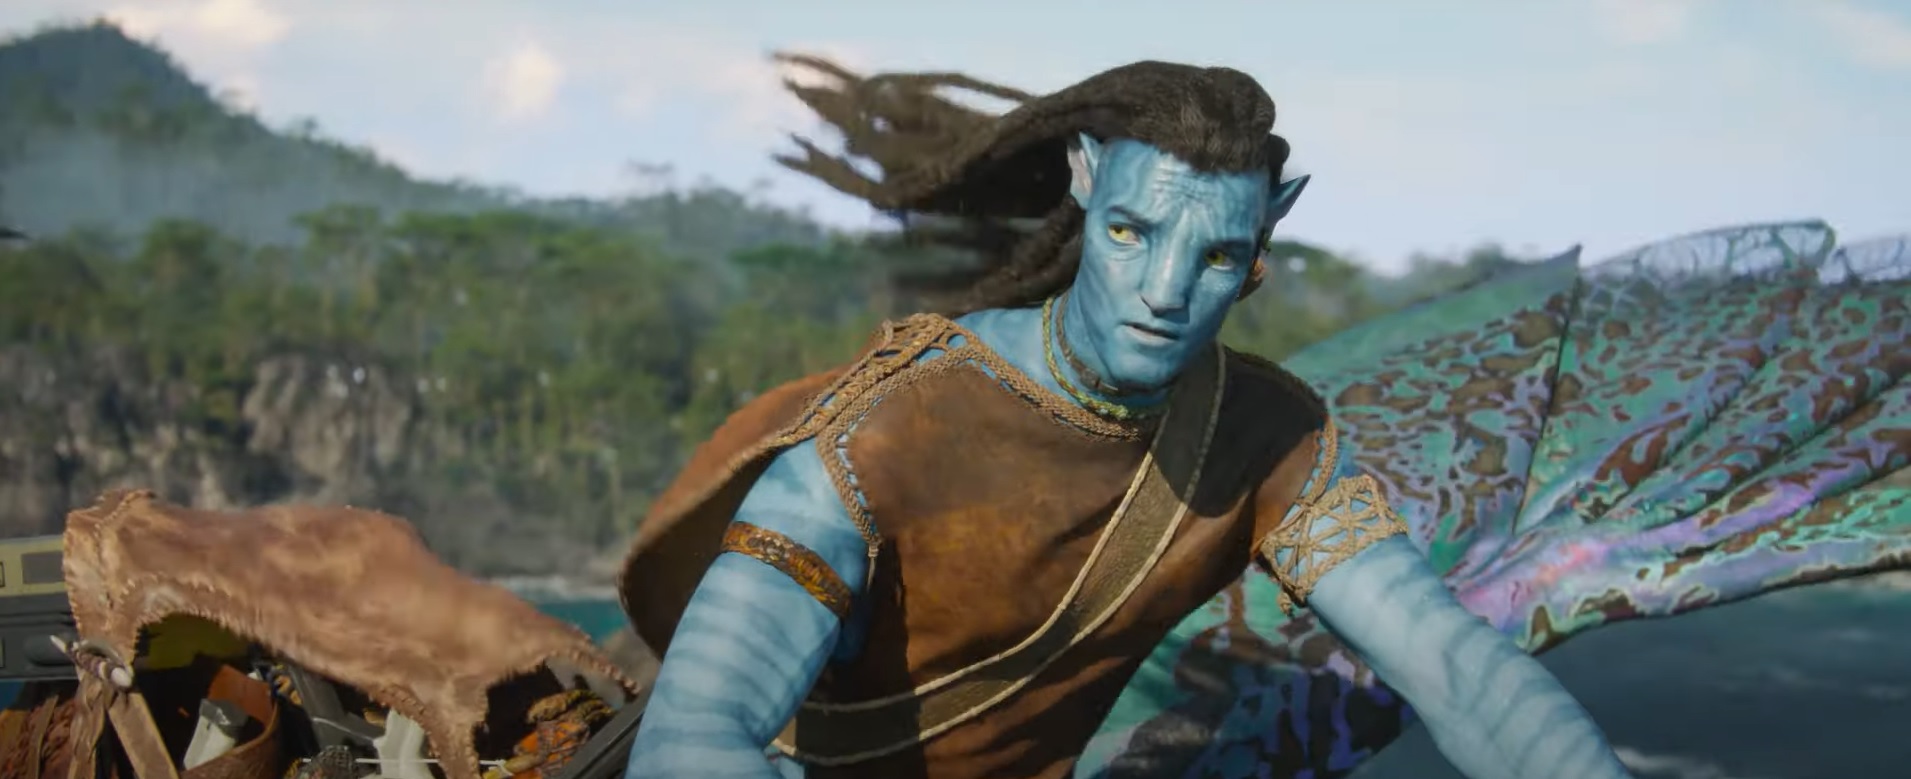 James Cameron Is Excited For Avatar 4, But He Doesn't Even Know If It's Going To Be Made Or Directed